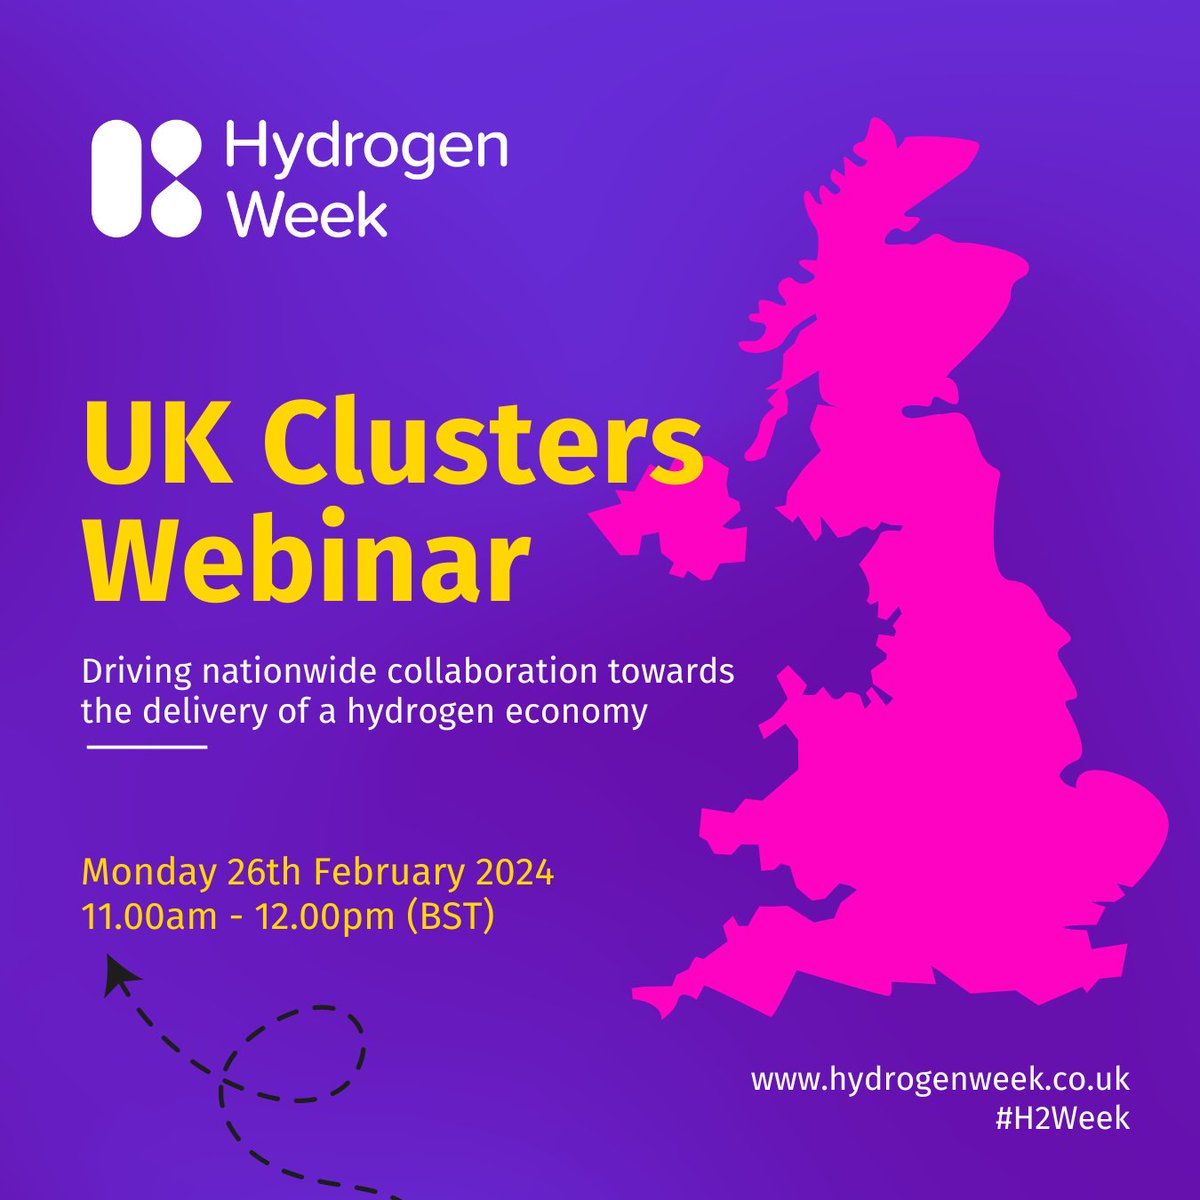 To kick off Hydrogen Week 2024 in style, on Monday 26th February we're holding a UK Clusters Webinar!

We’ll be having a candid discussion about what #hydrogen projects are underway in each UK cluster.

Book here: eventbrite.co.uk/e/uk-clusters-…